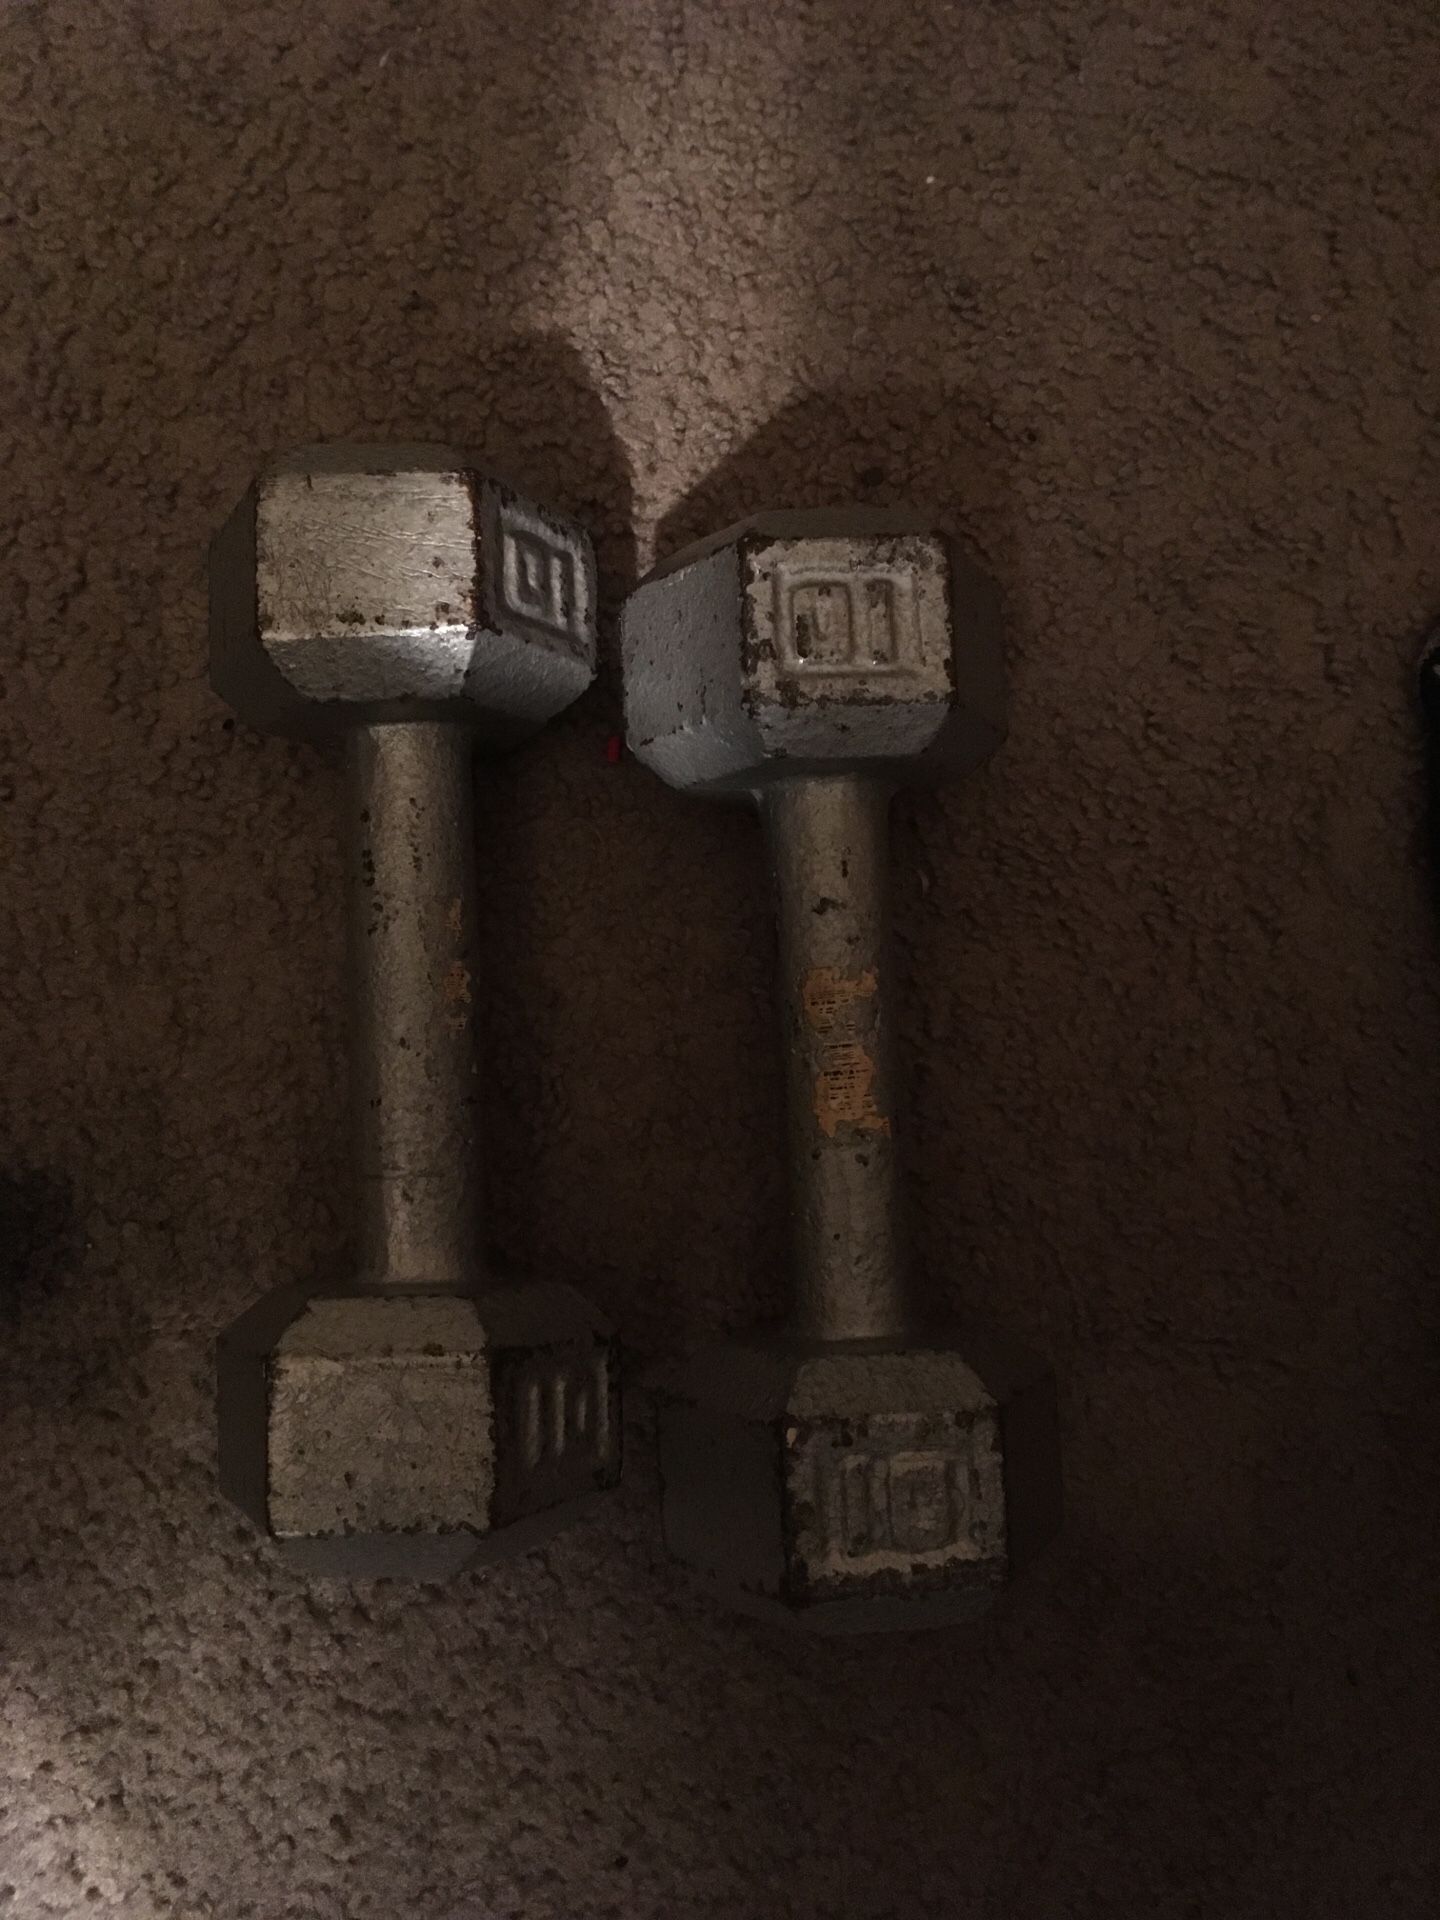 10lb weights